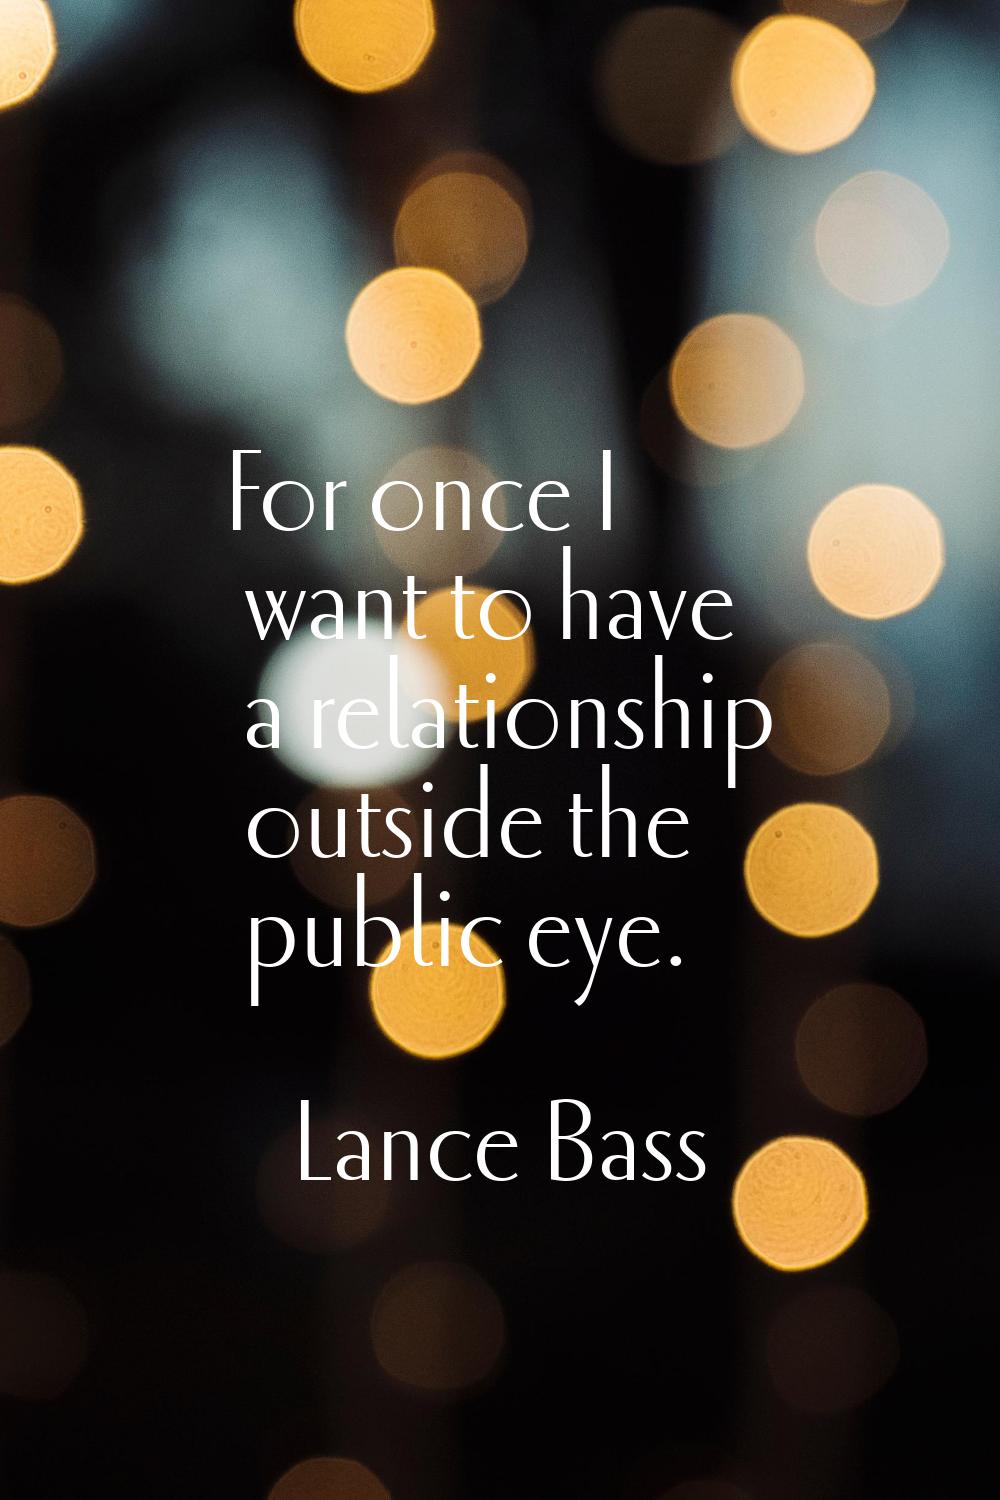 For once I want to have a relationship outside the public eye.